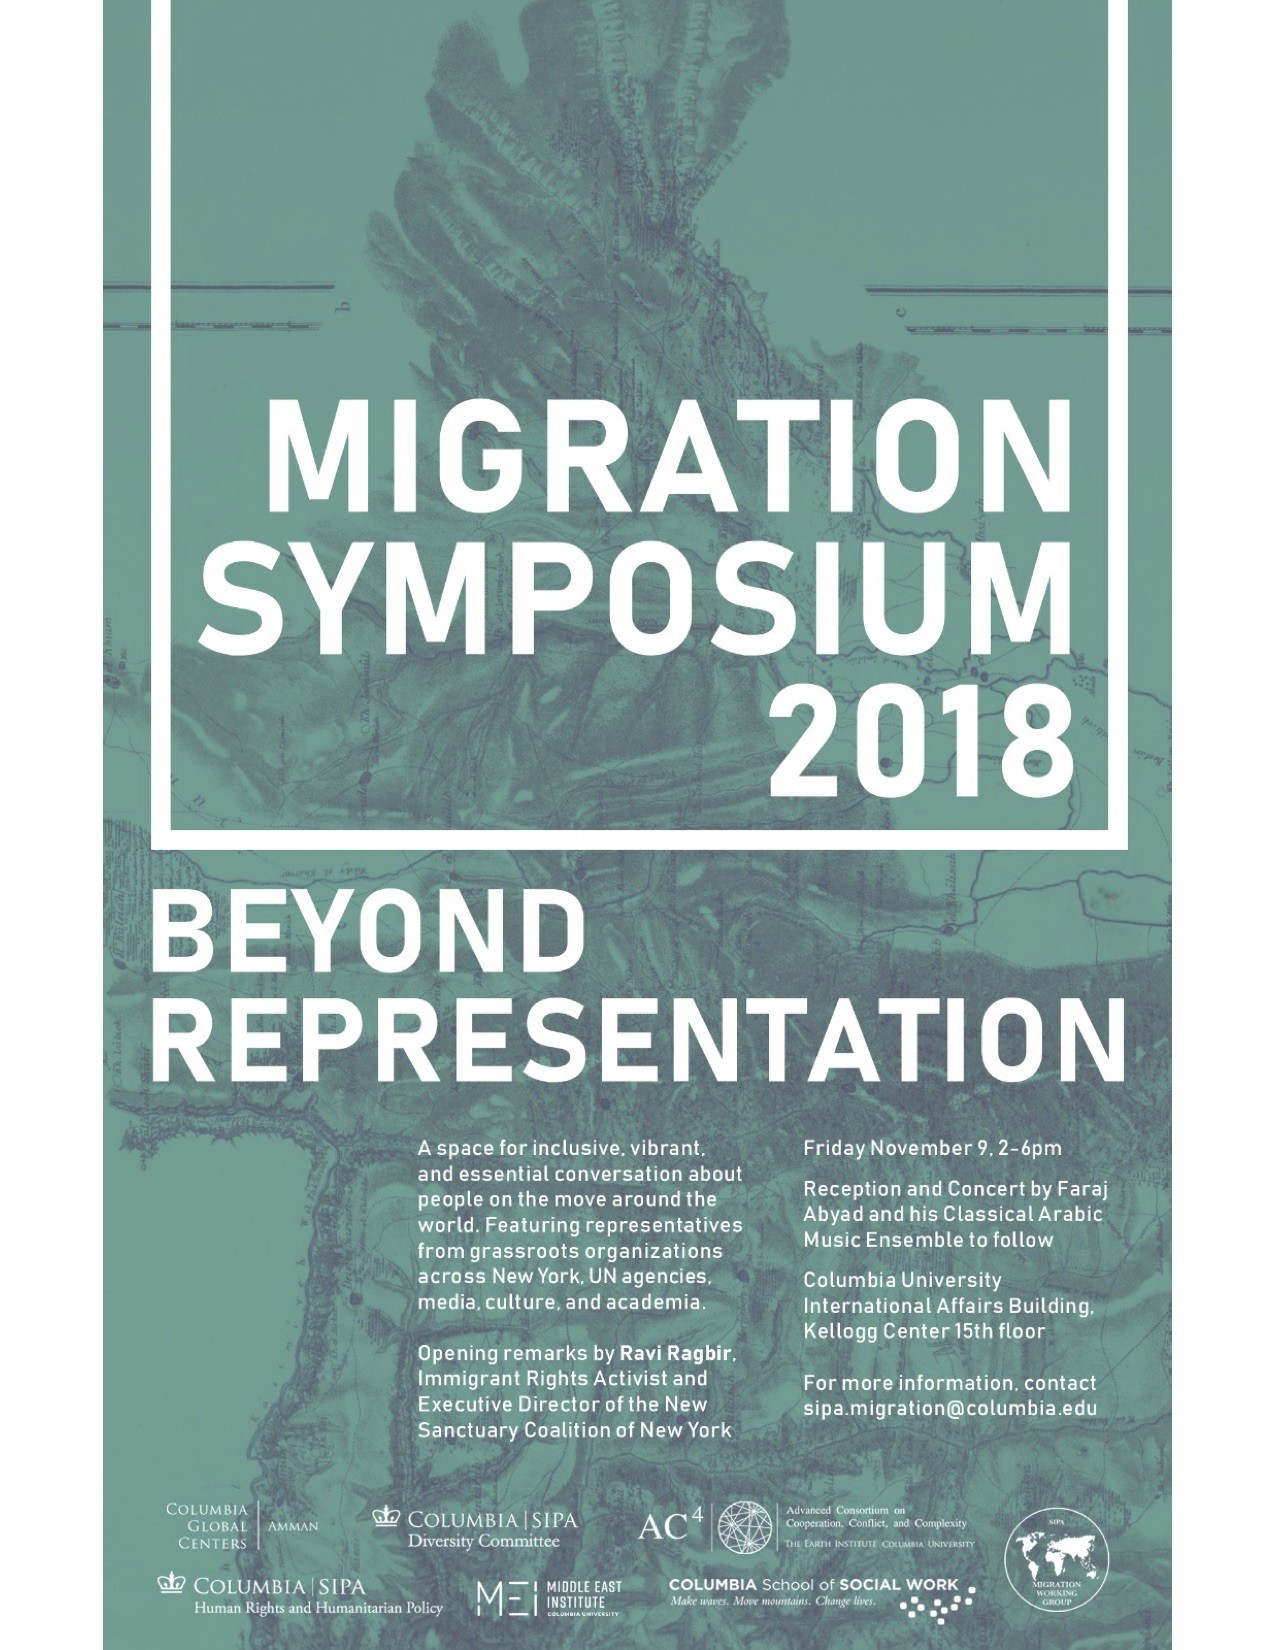 Flyer for the event "Migration Symposium 2018: Beyond Representation"